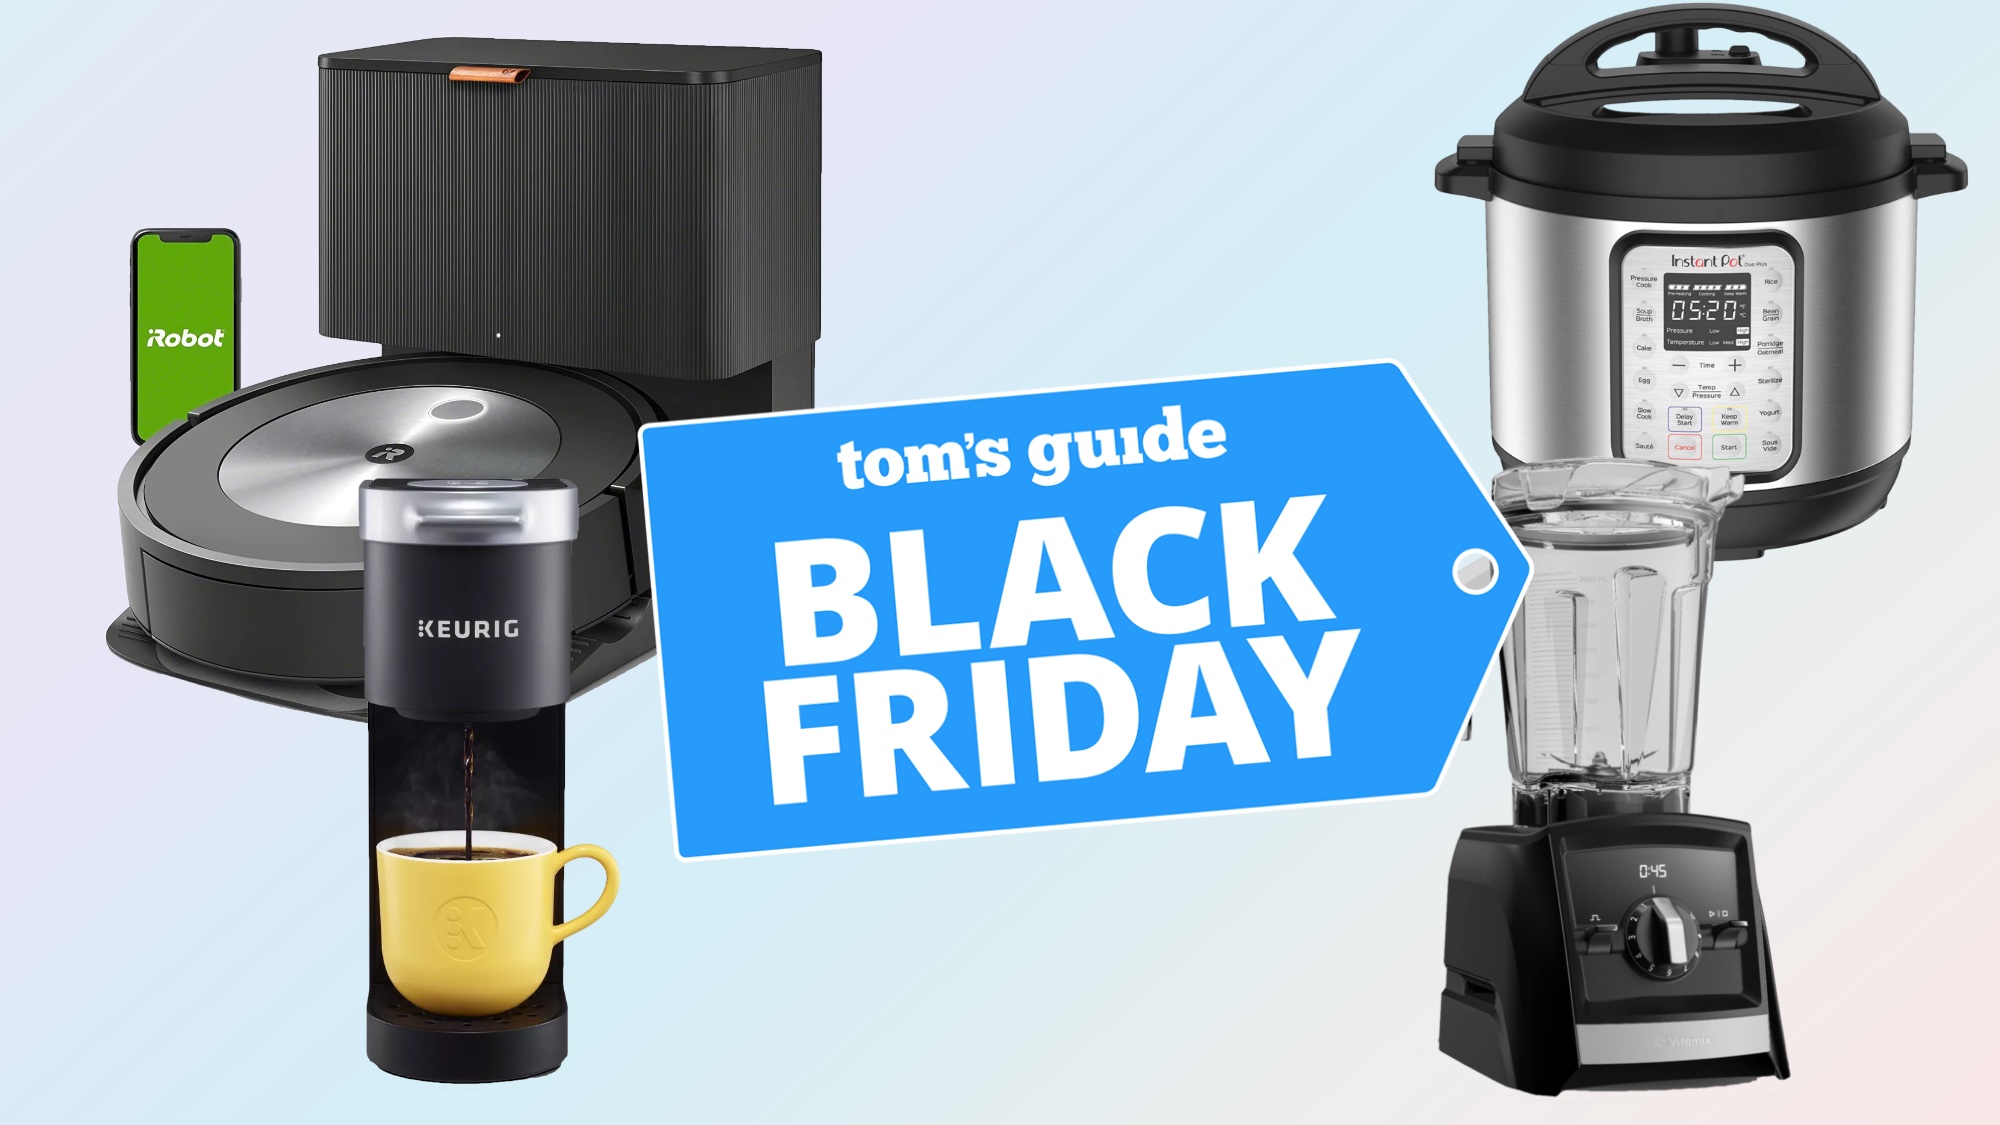 These Ninja Black Friday Deals Are Here With $49 Blenders and More